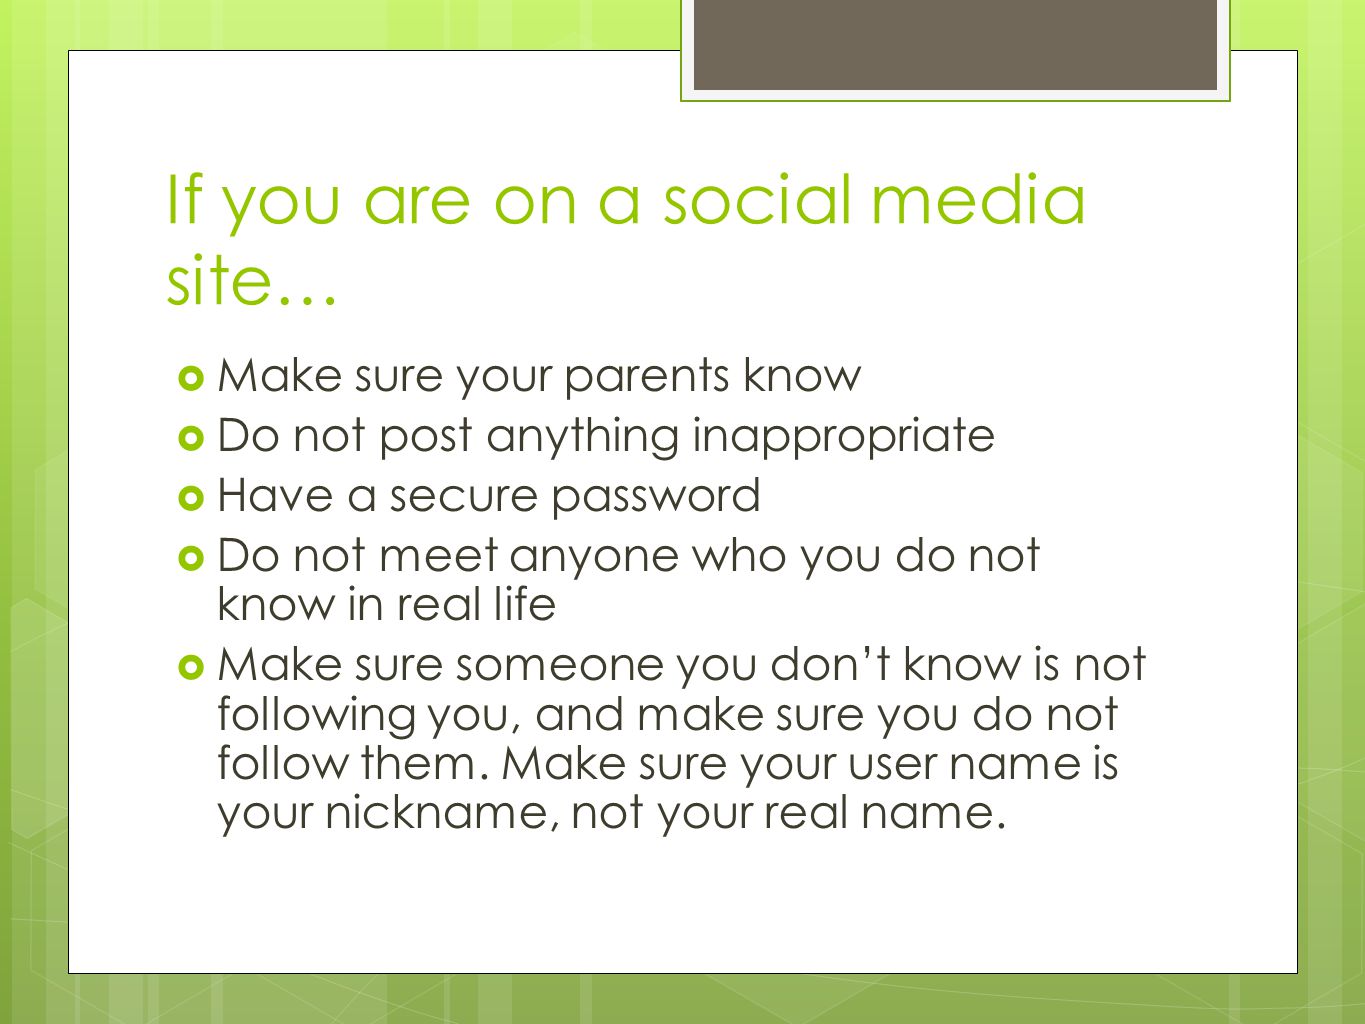 If you are on a social media site…